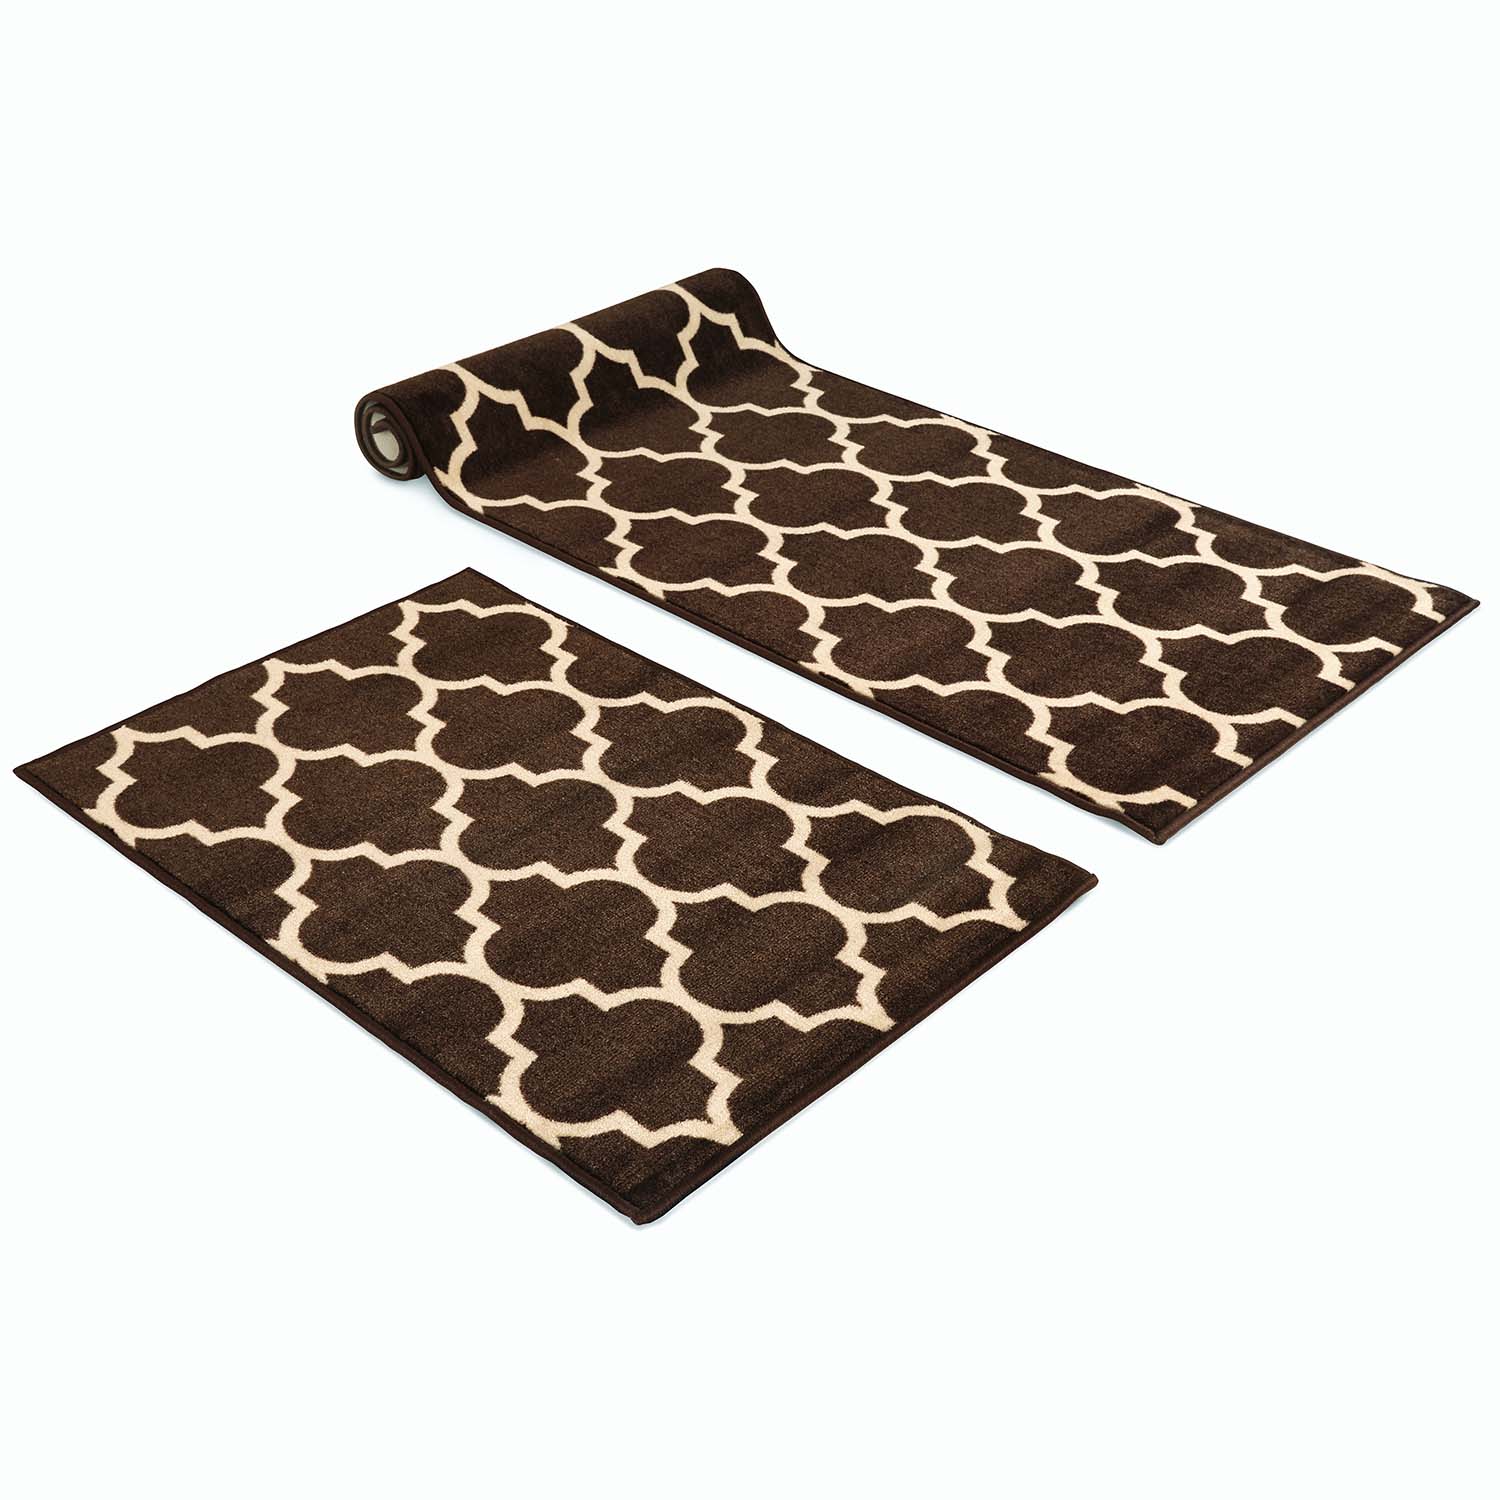 Prest-O-Fit Aero-Weave Breathable Outdoor Mat